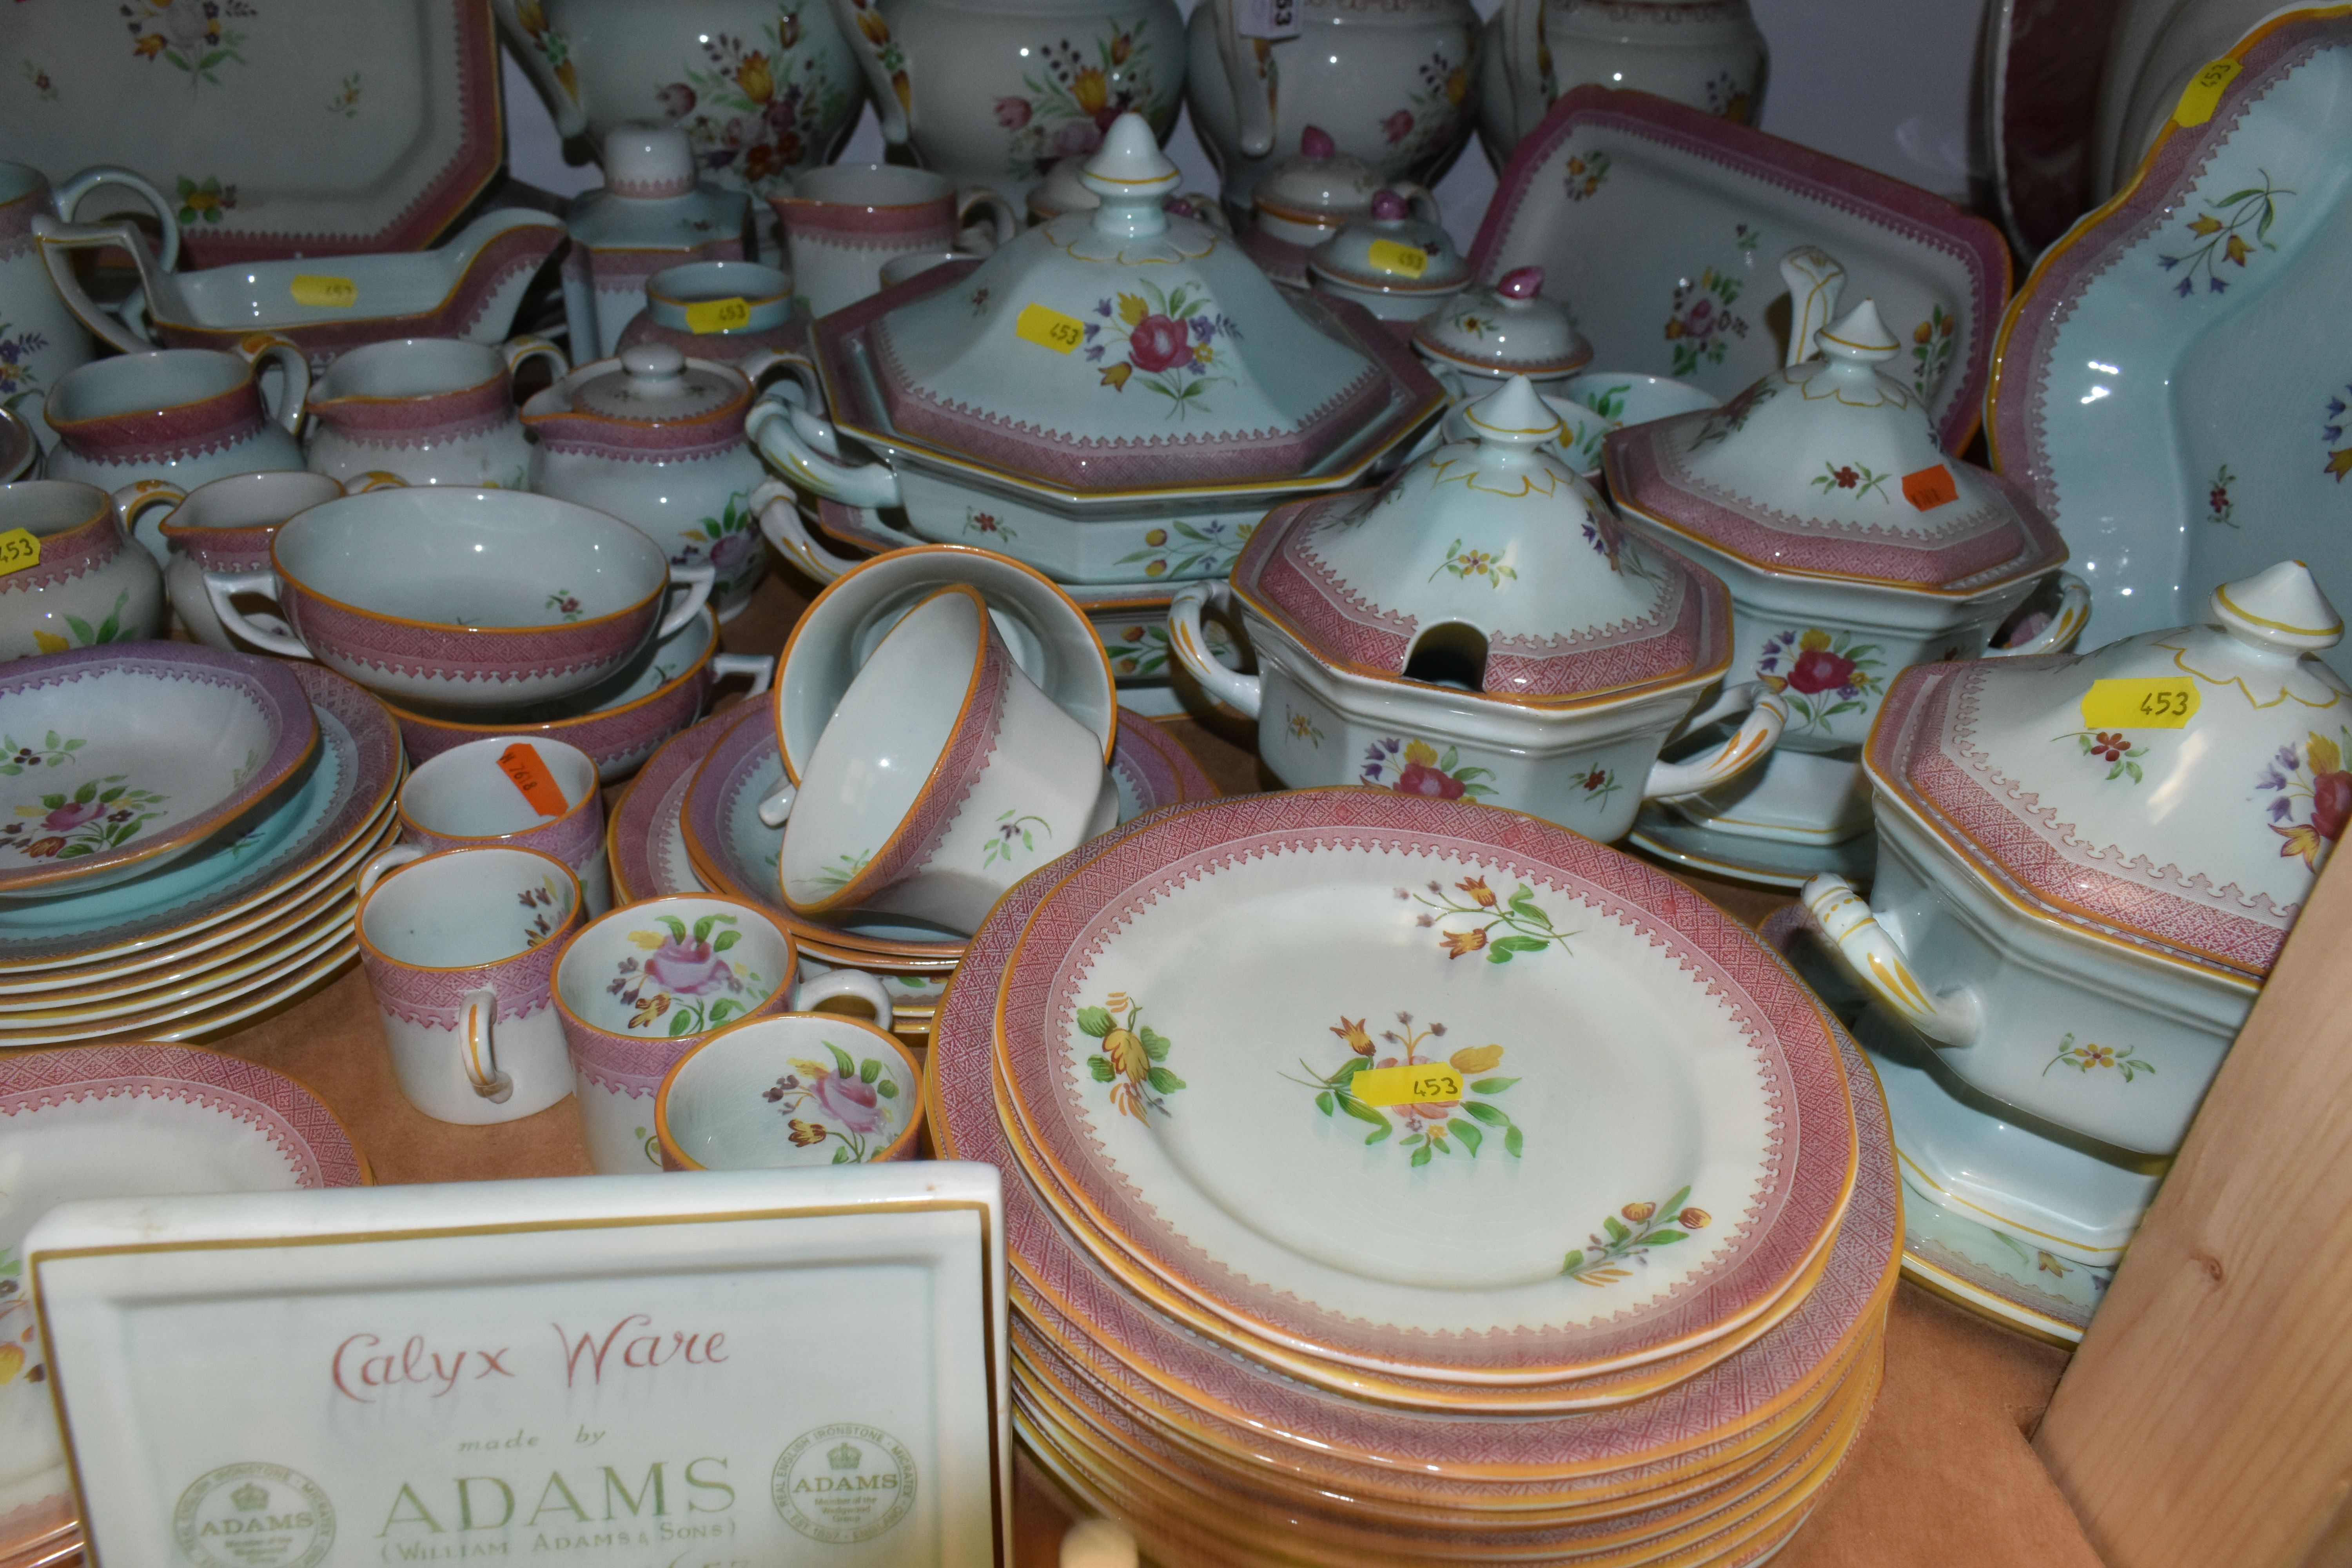 A LARGE ADAMS TEA AND DINNER SET IN HAND-PAINTED 'CALYX WARE' PATTERN to include coffee cups, - Image 4 of 6